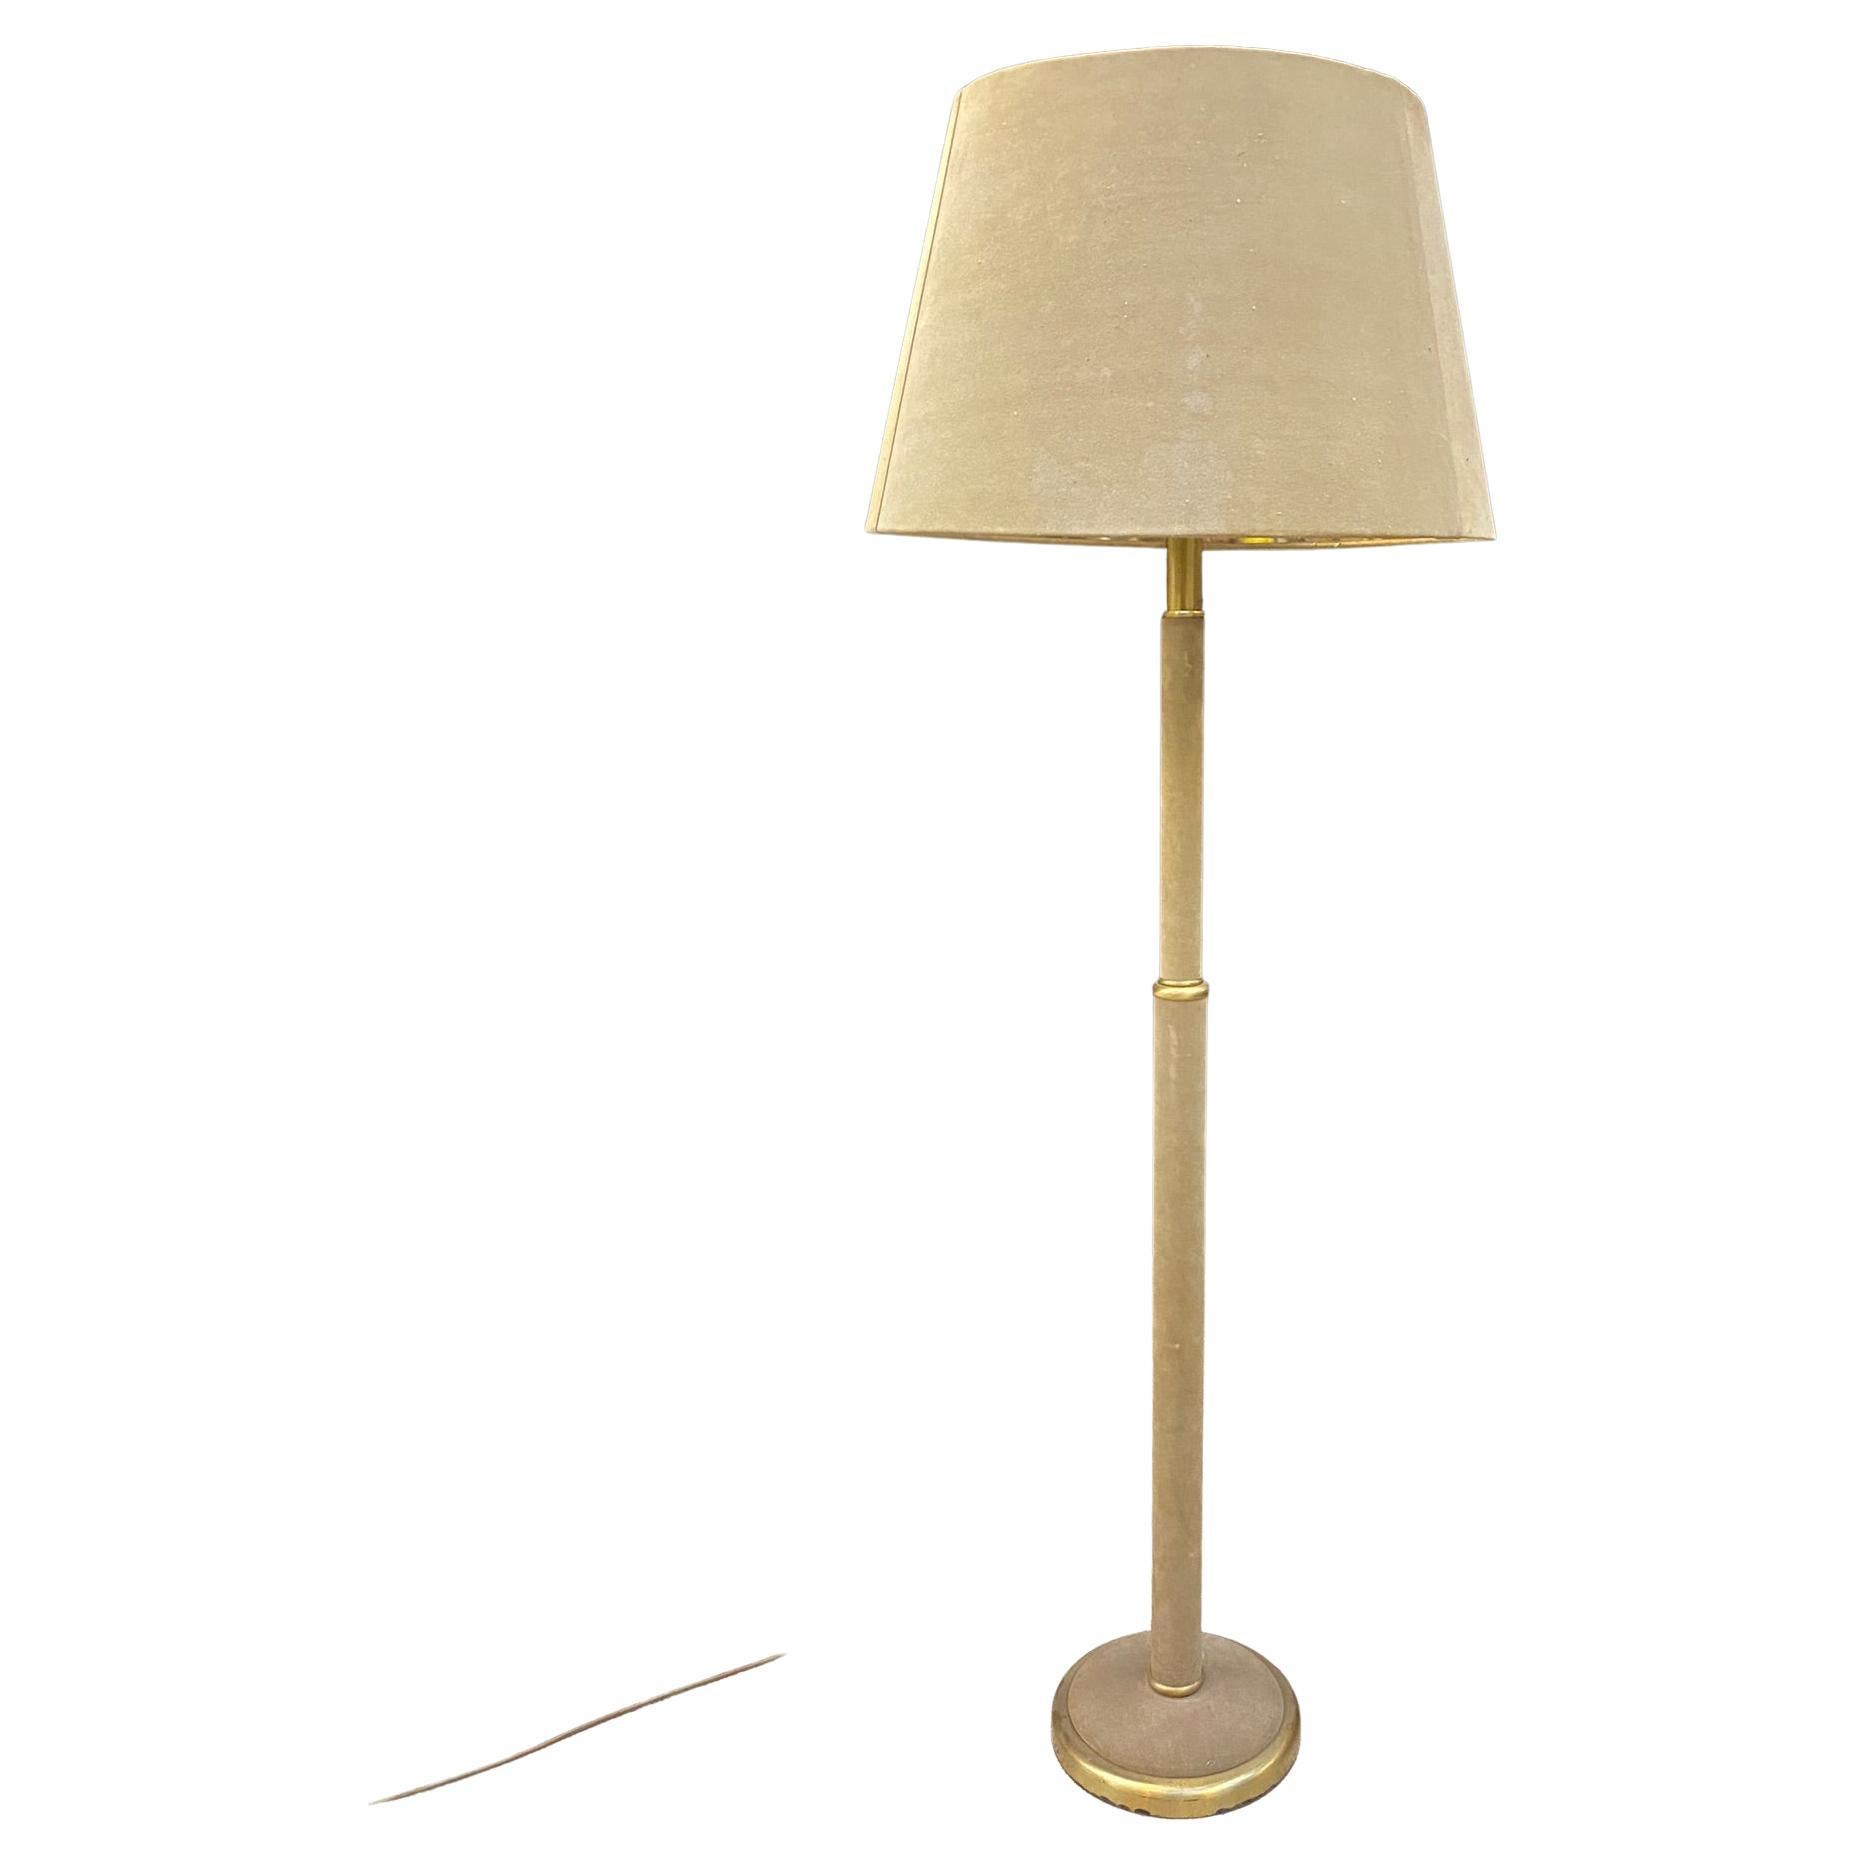 Elegant Floor Lamp in Suede Leather in the Style of Jacques Adnet, circa 1960 For Sale